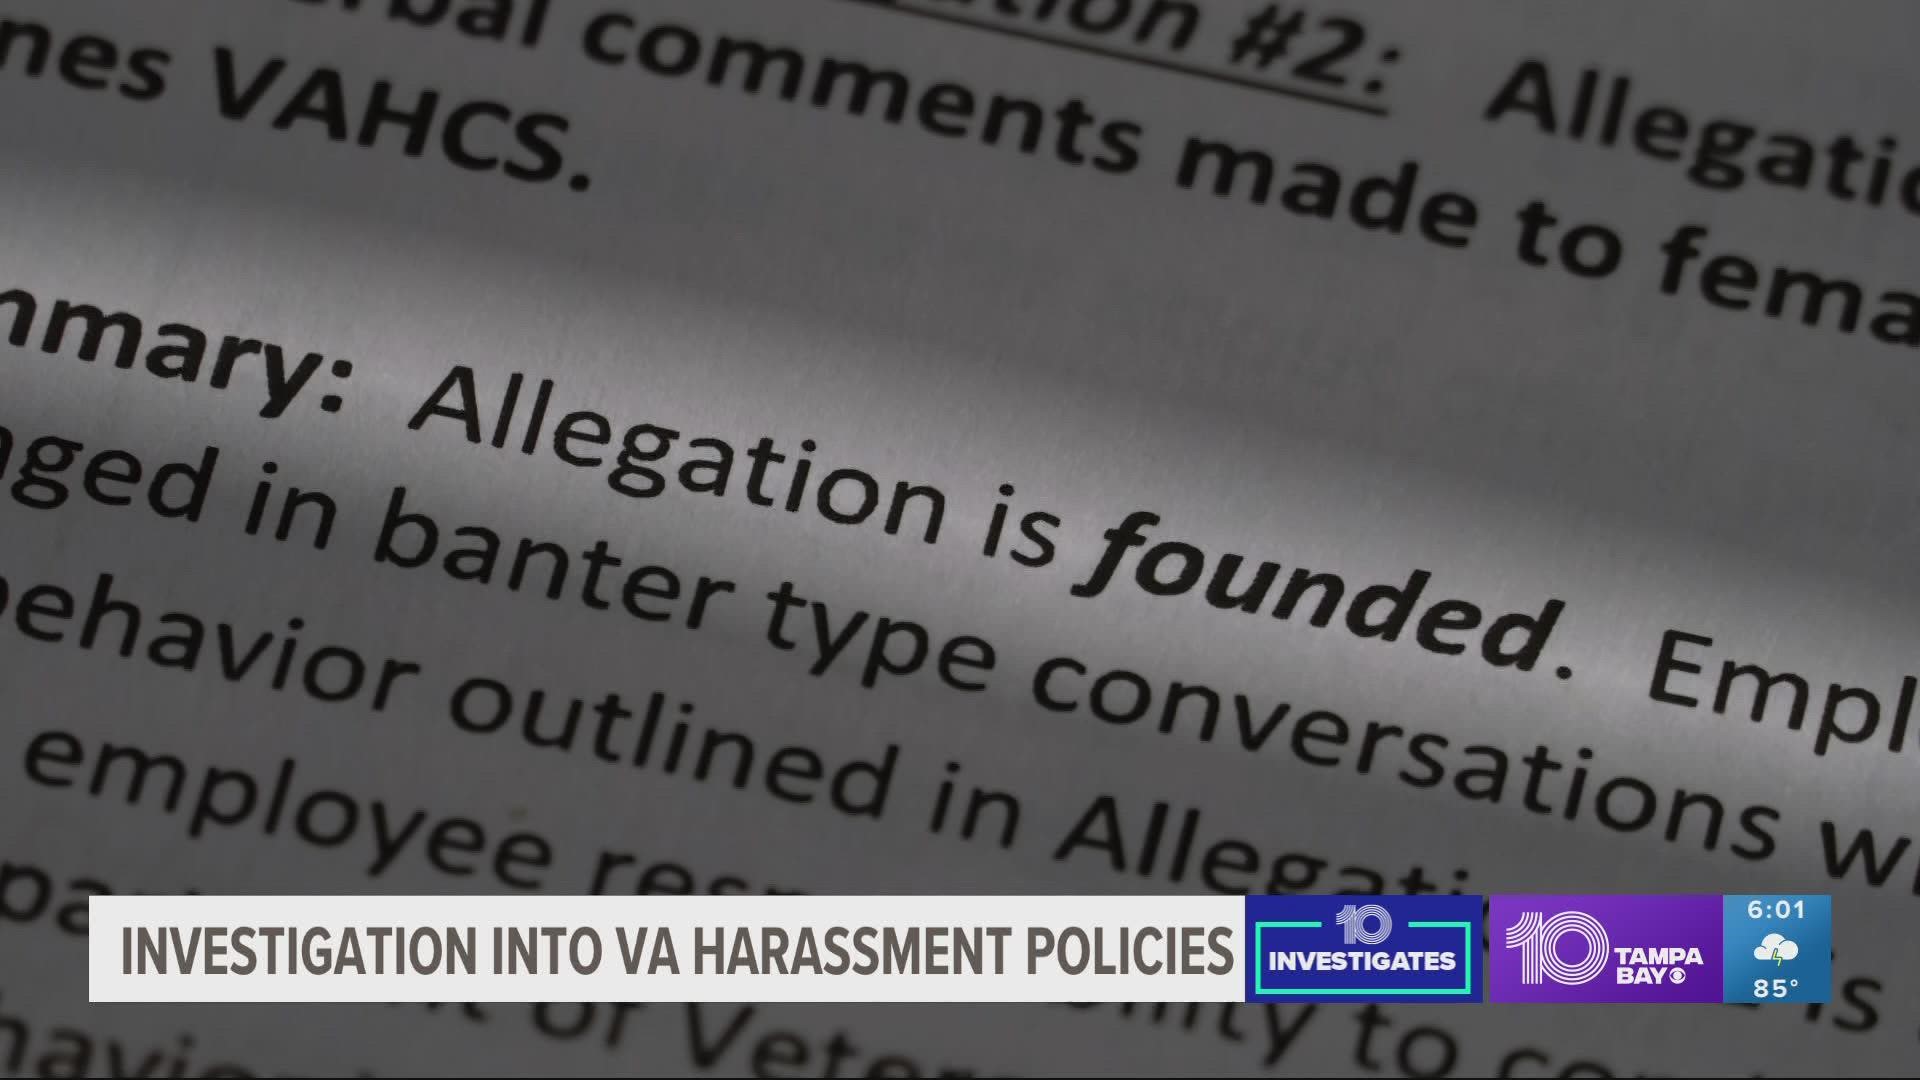 10Investigates found only 15% of cases at a local VA resulted in a firing.